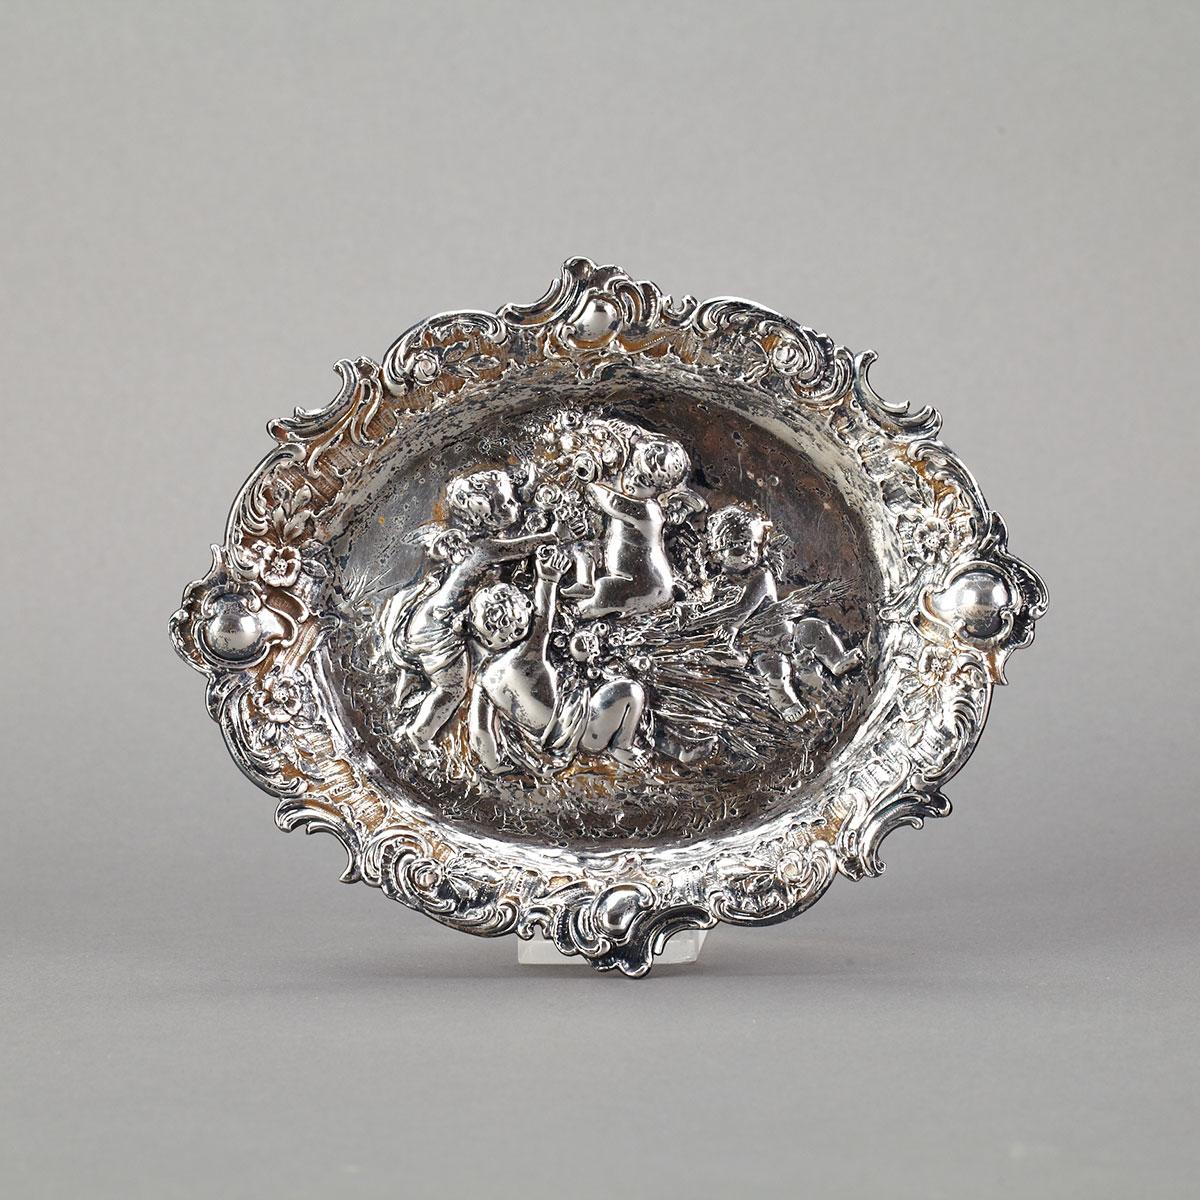 German Silver Small Oval Tray, c.1900